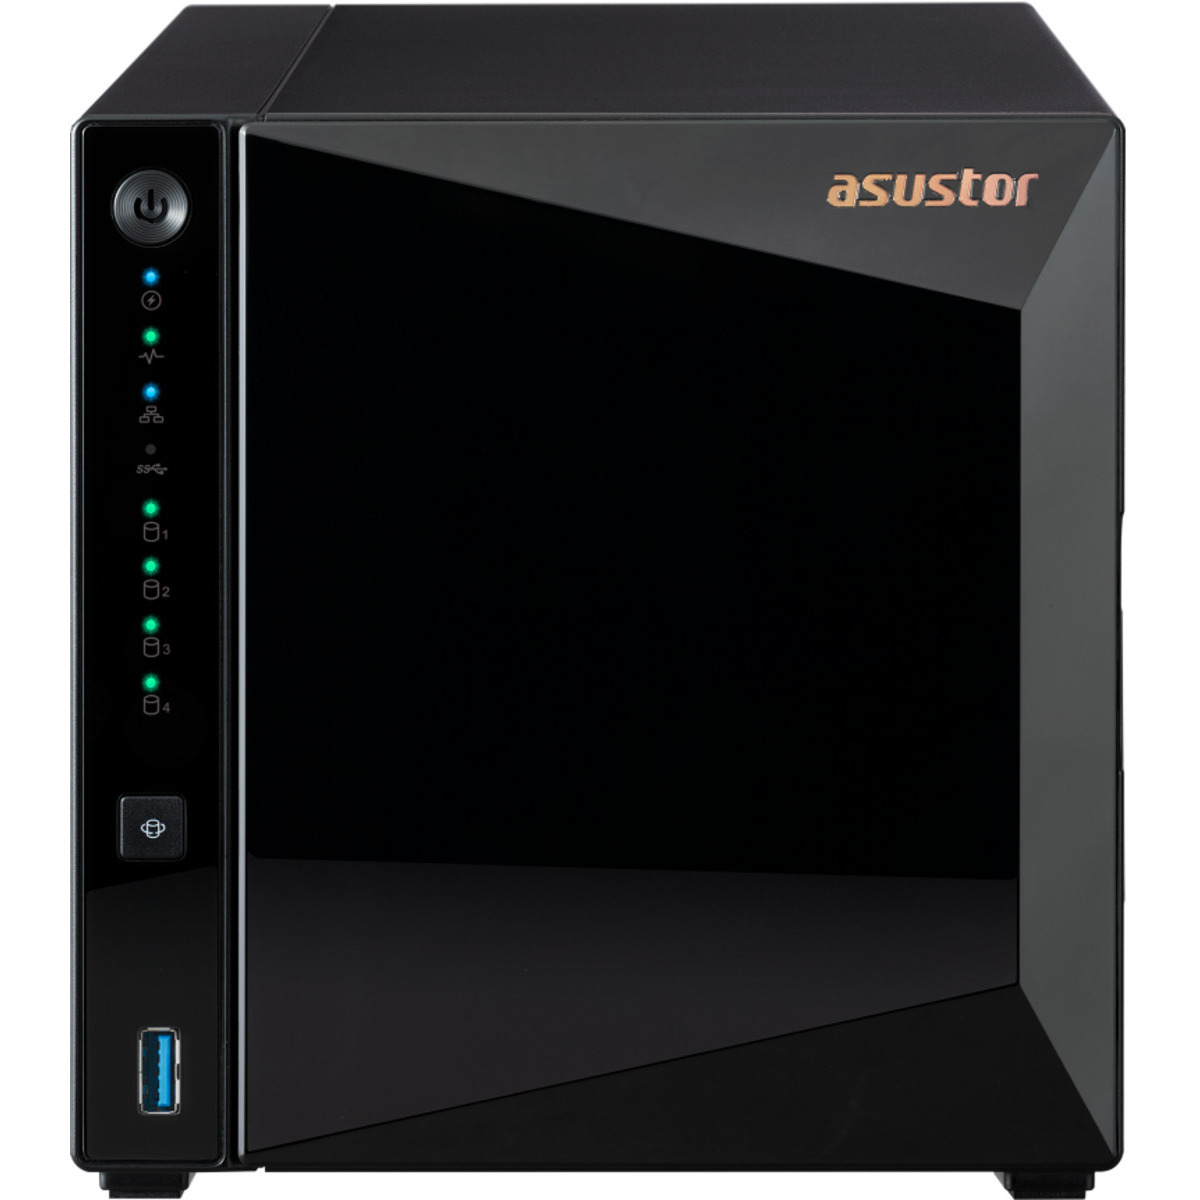 ASUSTOR DRIVESTOR 4 Pro Gen2 AS3304T v2 30tb 4-Bay Desktop Personal / Basic Home / Small Office NAS - Network Attached Storage Device 3x10tb Seagate IronWolf Pro ST10000NT001 3.5 7200rpm SATA 6Gb/s HDD NAS Class Drives Installed - Burn-In Tested - ON SALE DRIVESTOR 4 Pro Gen2 AS3304T v2